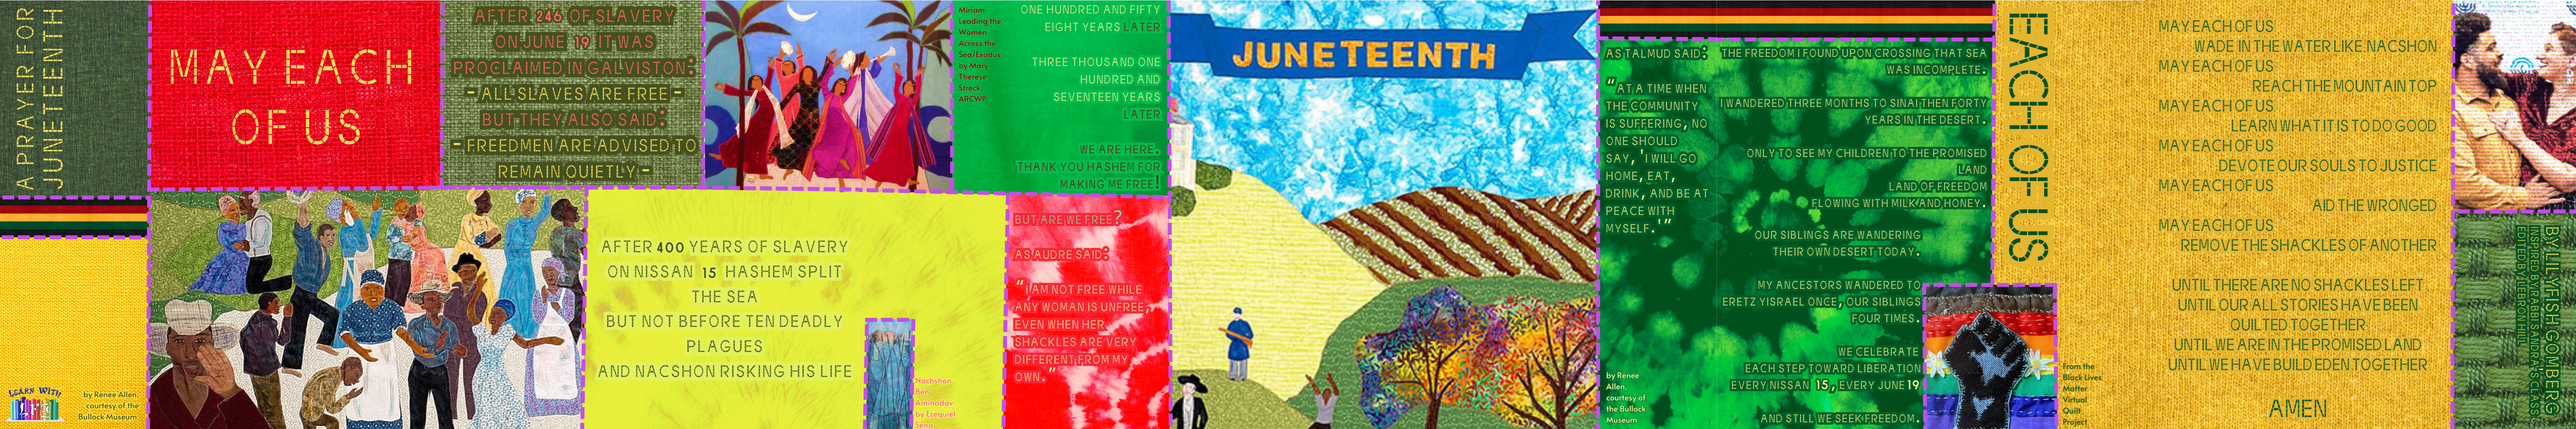 May Each of Us: A Jewish Prayer for Juneteenth